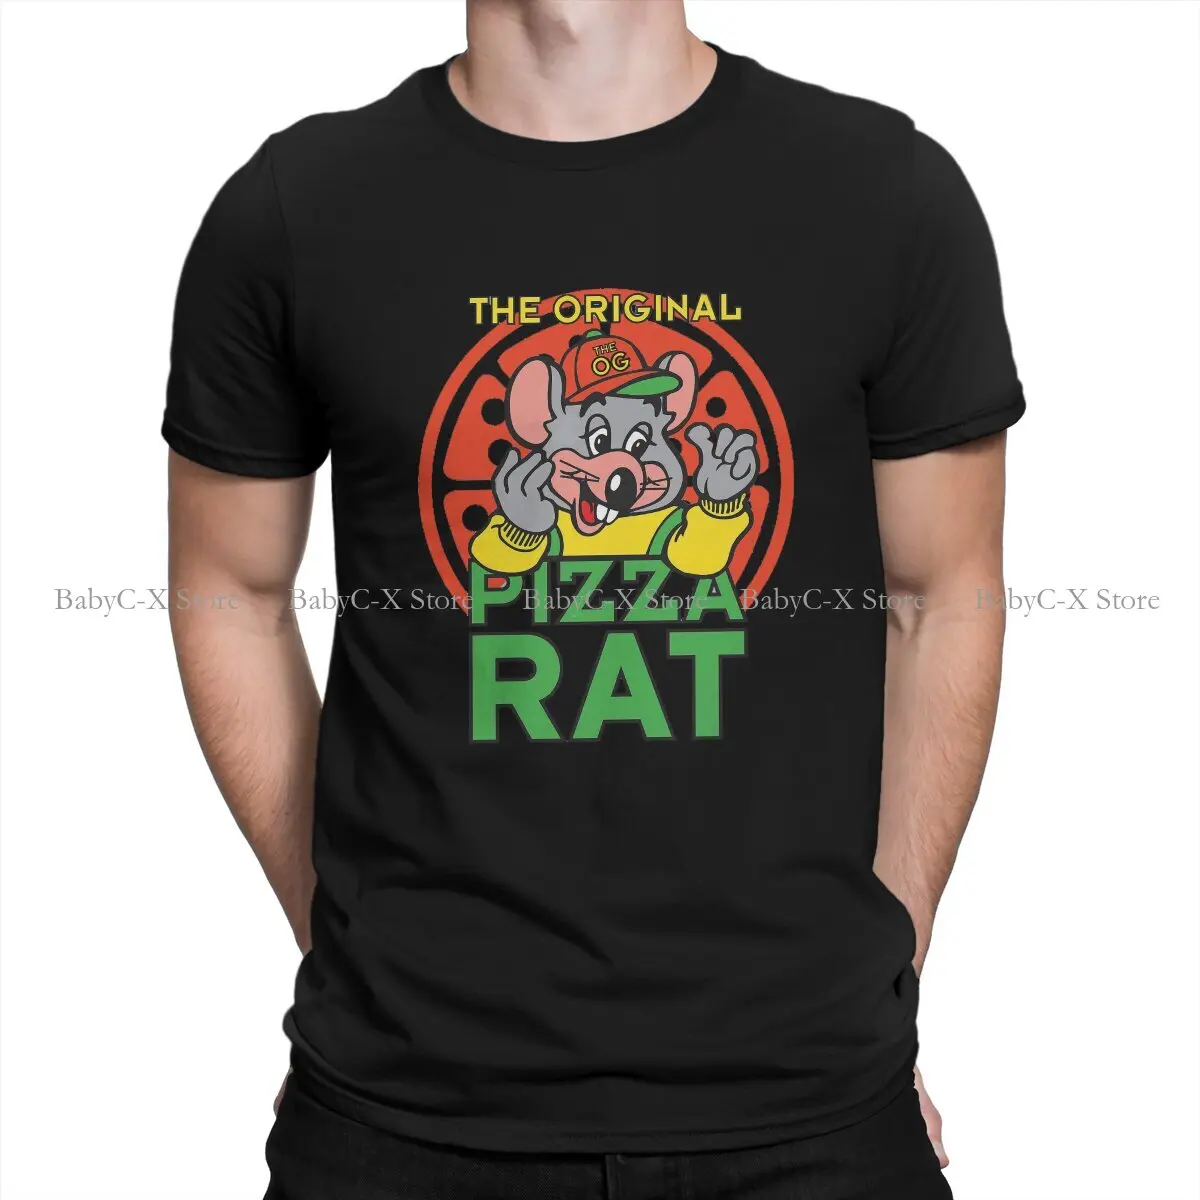 

Chuck E Cheese Dining Room Polyester TShirt for Men The Original Pizza Rat Soft Leisure Sweatshirts T Shirt Novelty New Design